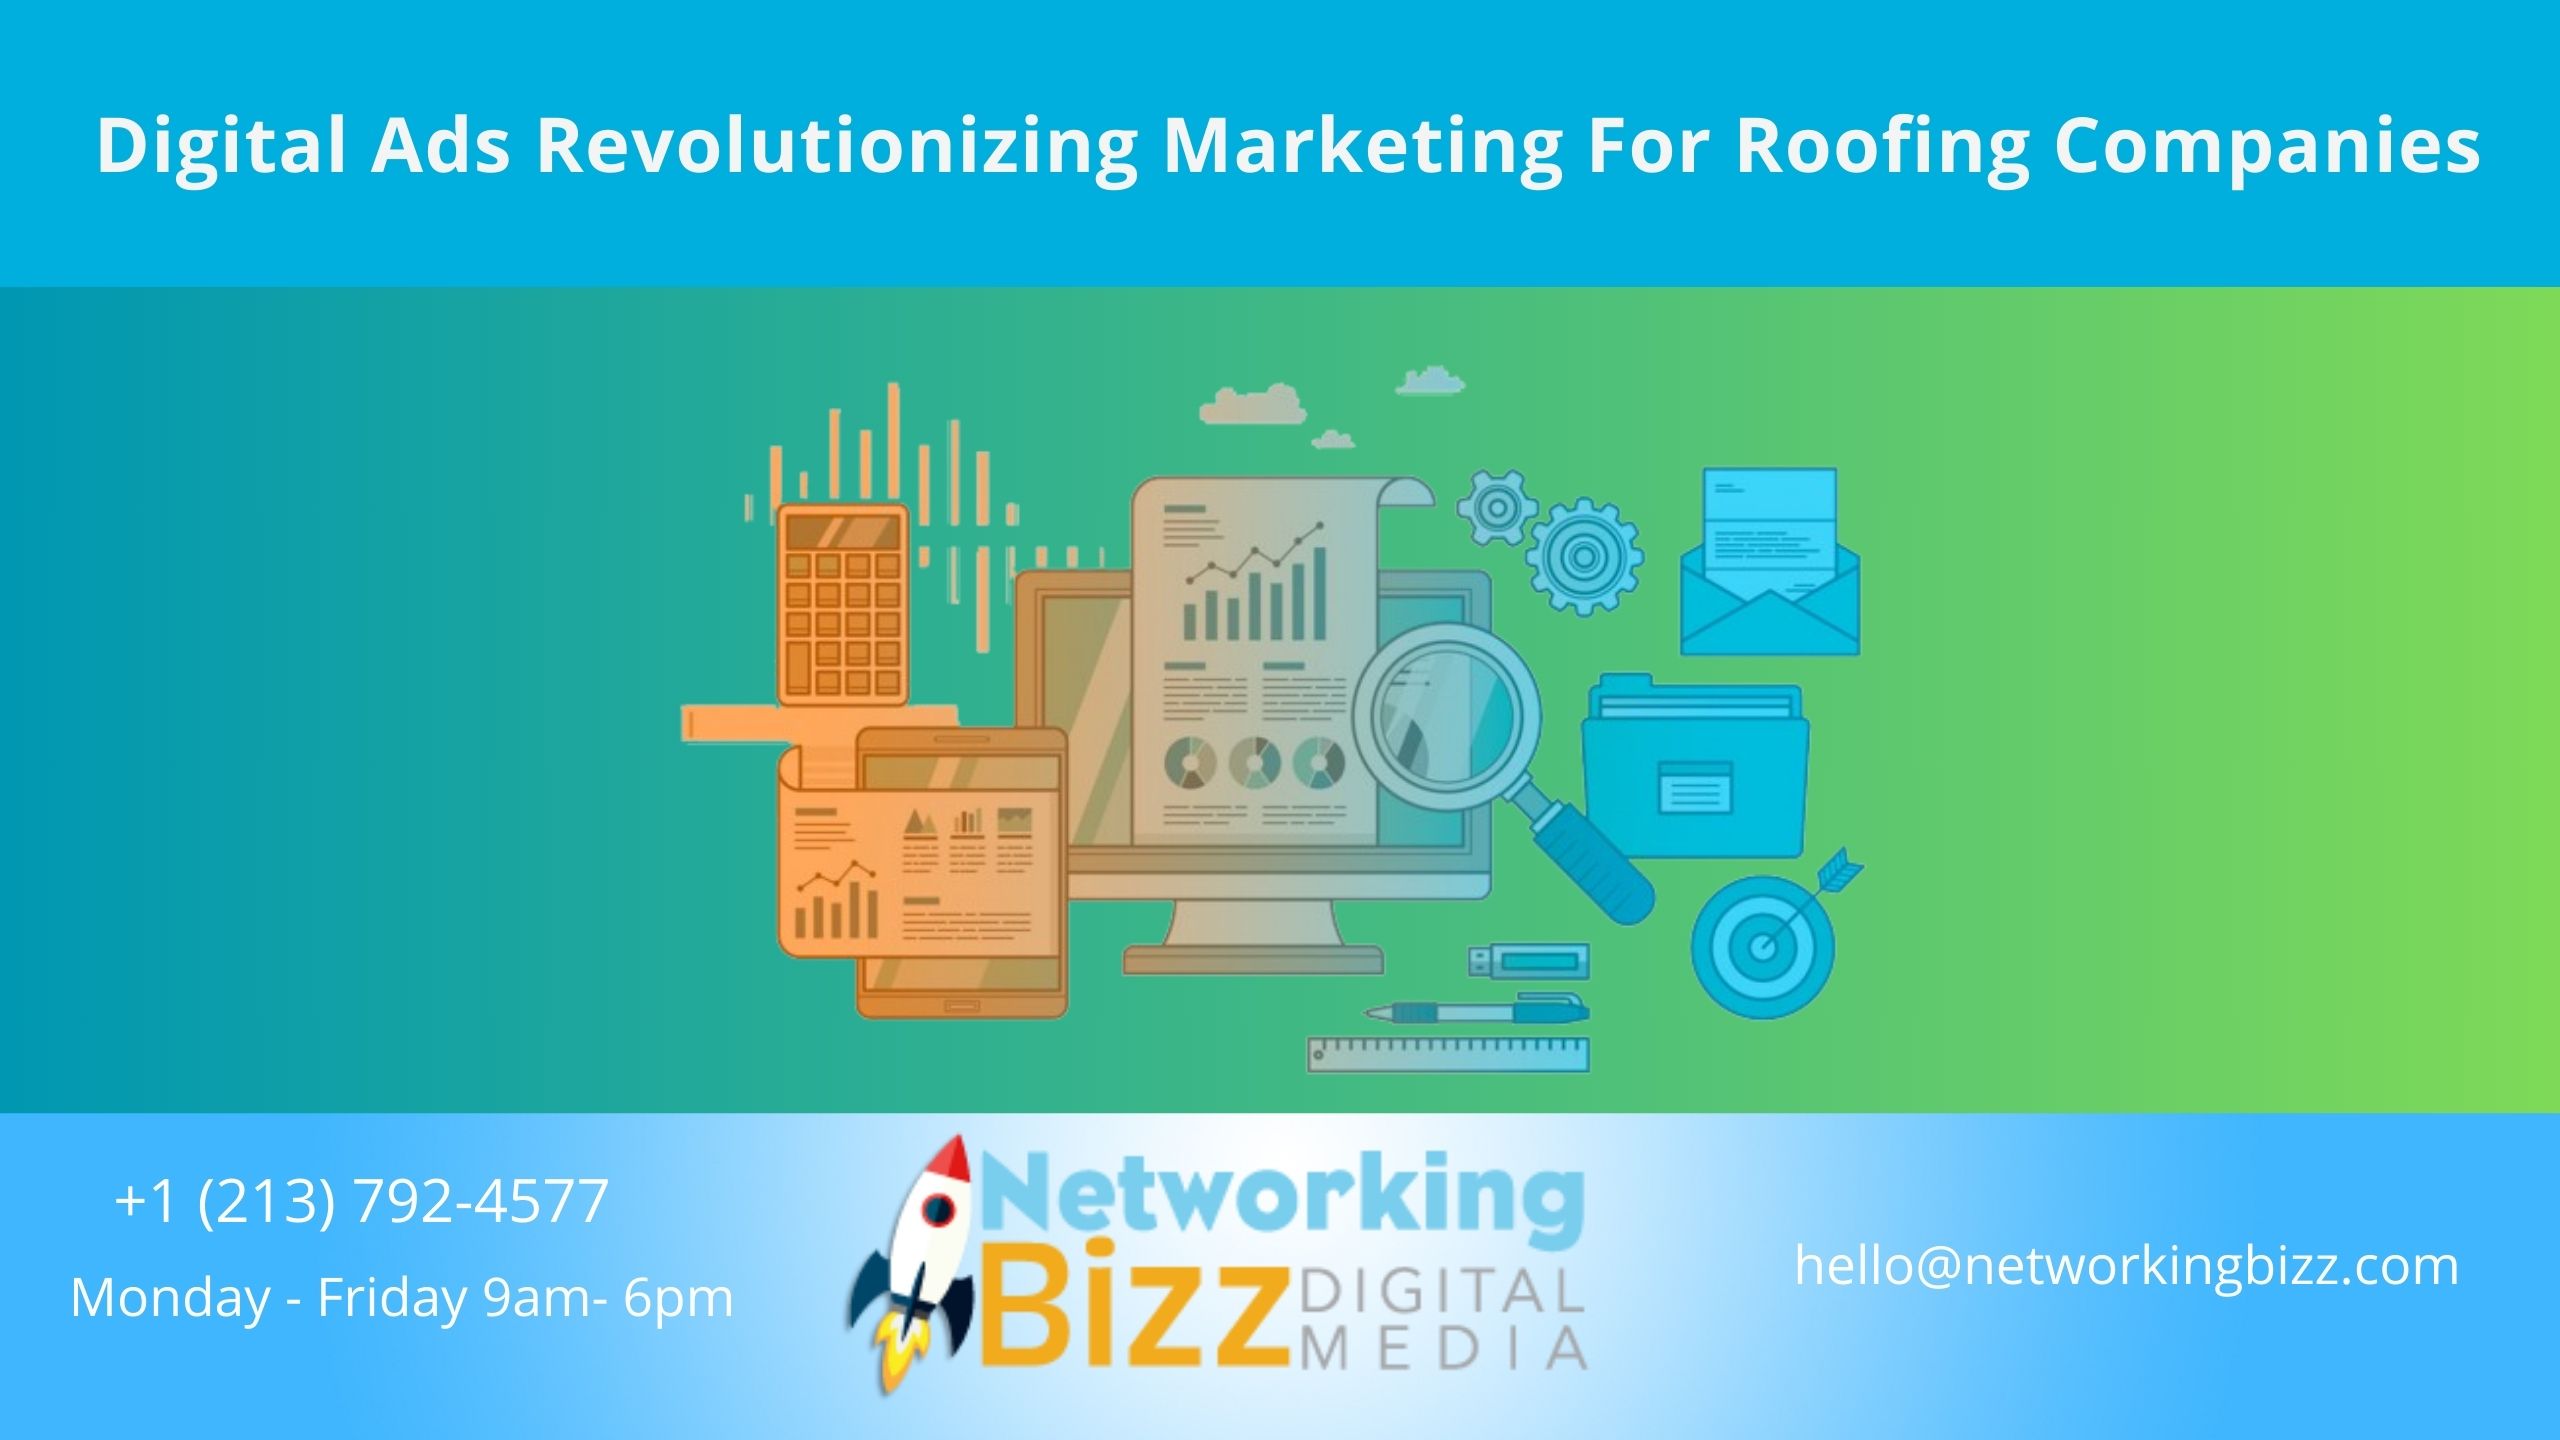 Digital Ads Revolutionizing Marketing For Roofing Companies